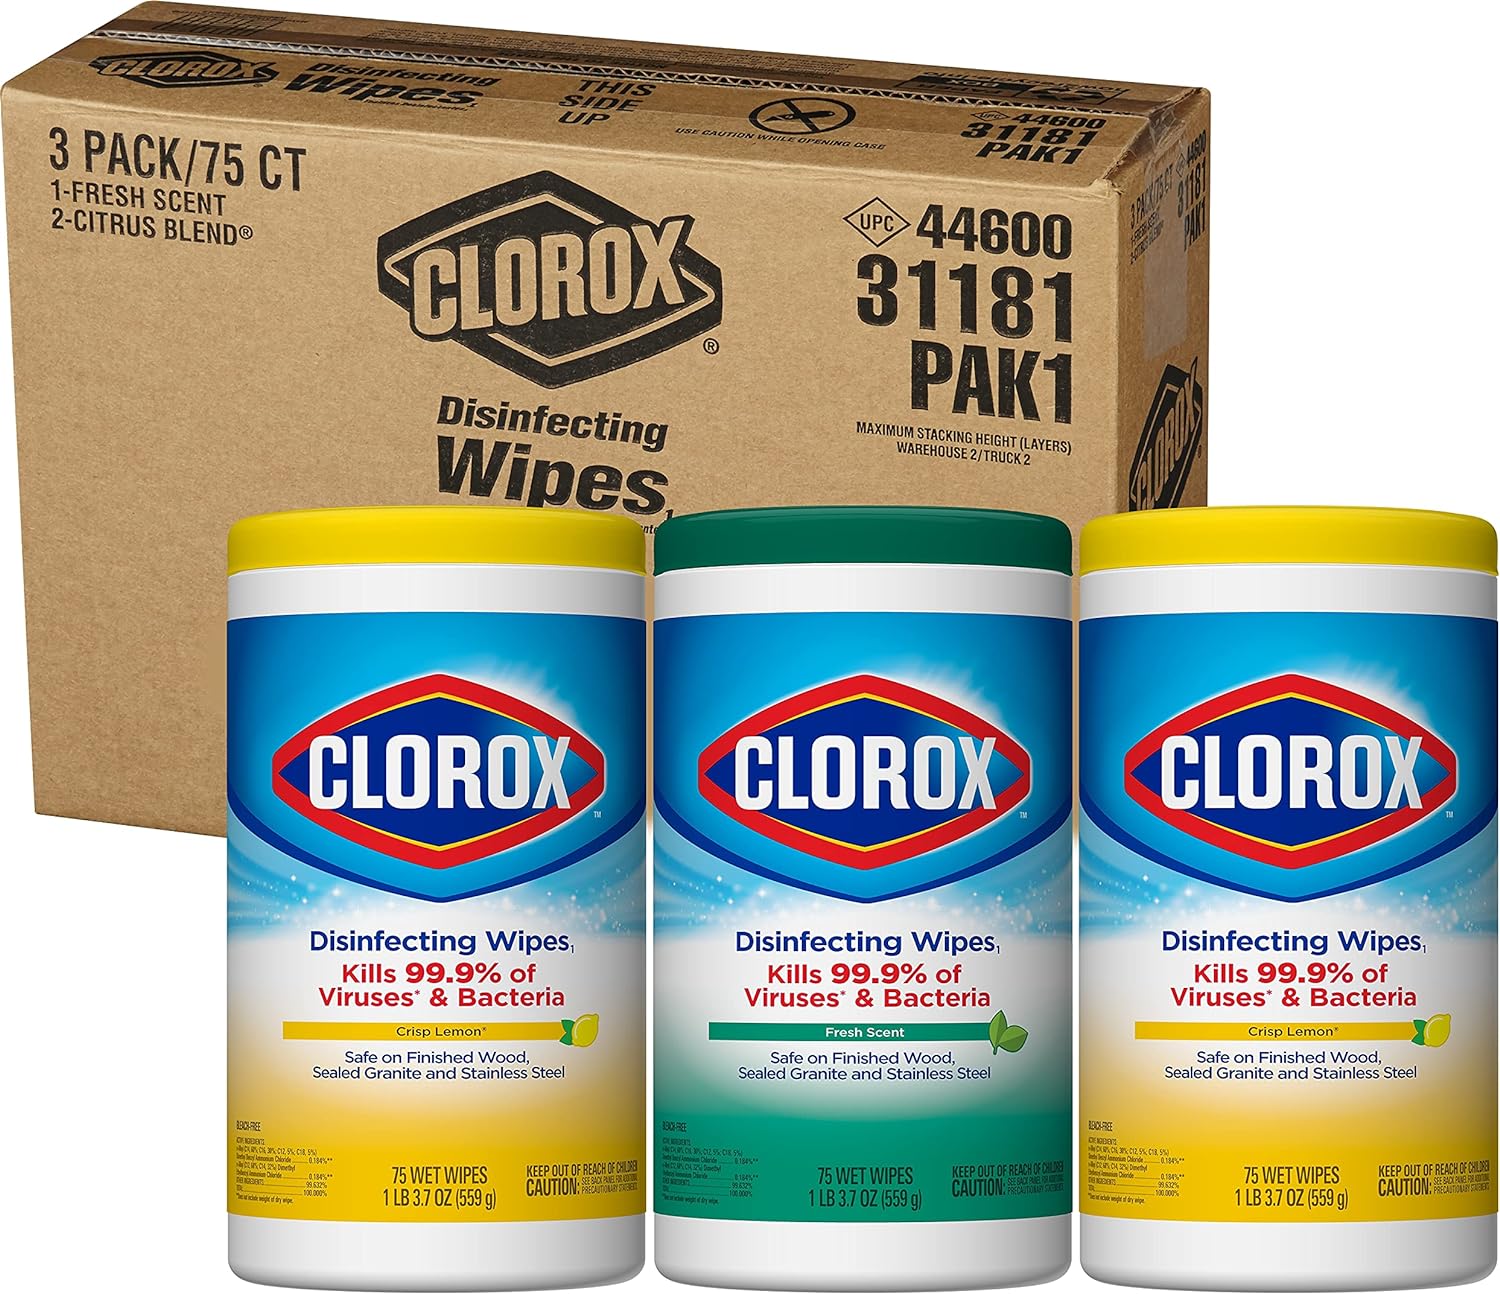 Clorox Disinfecting Wipes Value Pack, Cleaning Wipes, 75 Count Each, Pack of 3 (Package May Vary)